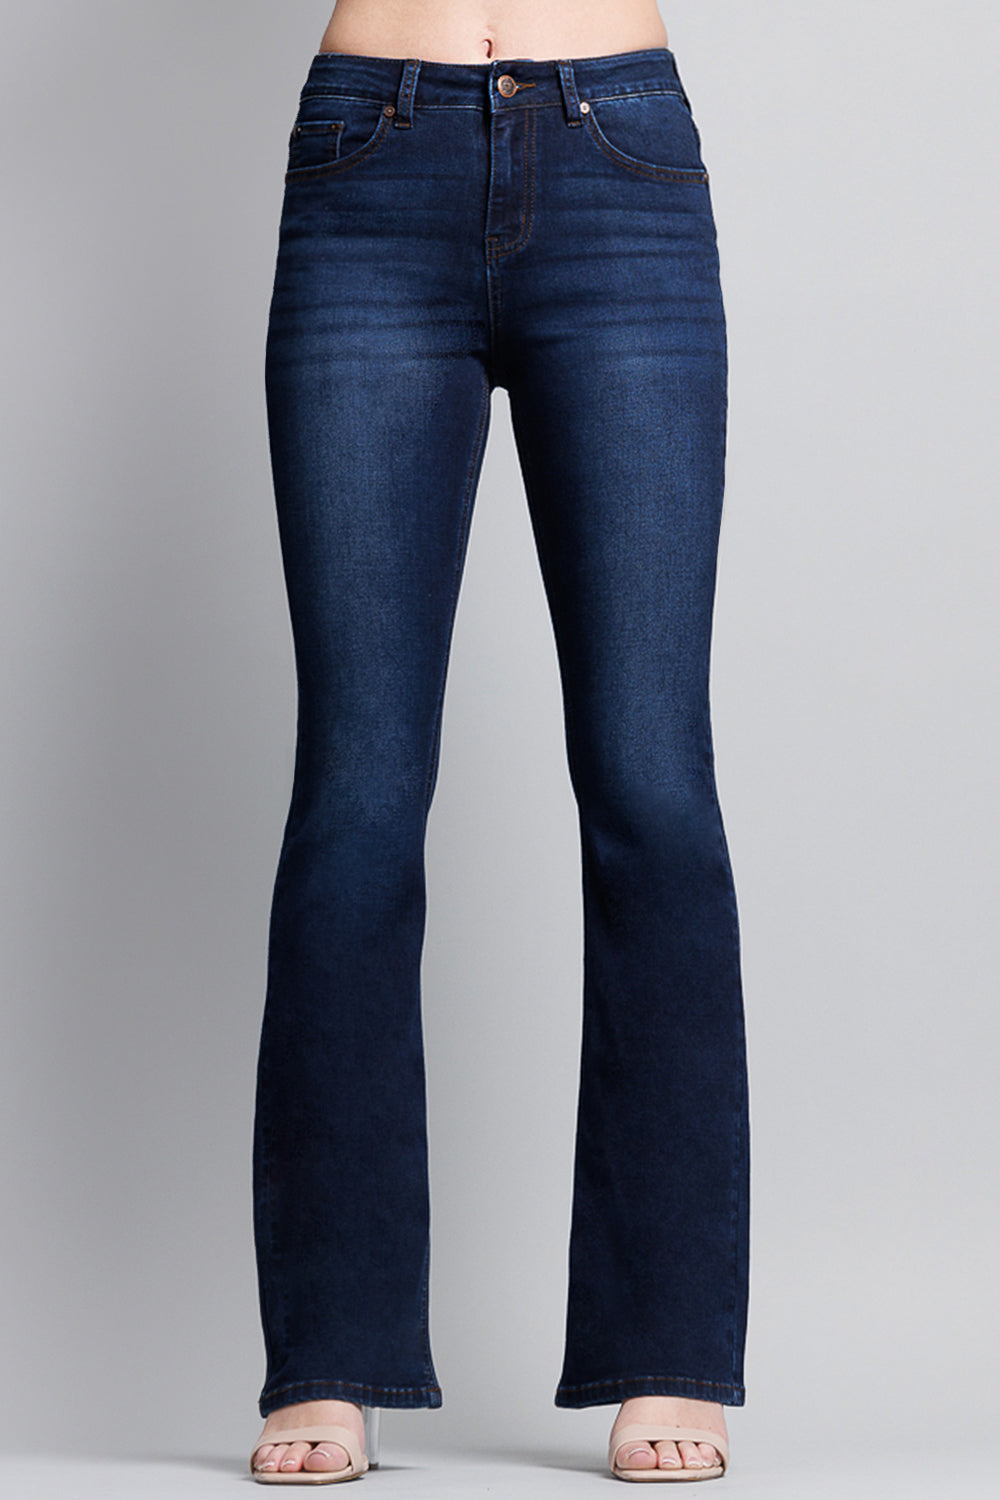 WEP3186 BOOTCUT JEANS MAIN IMAGE